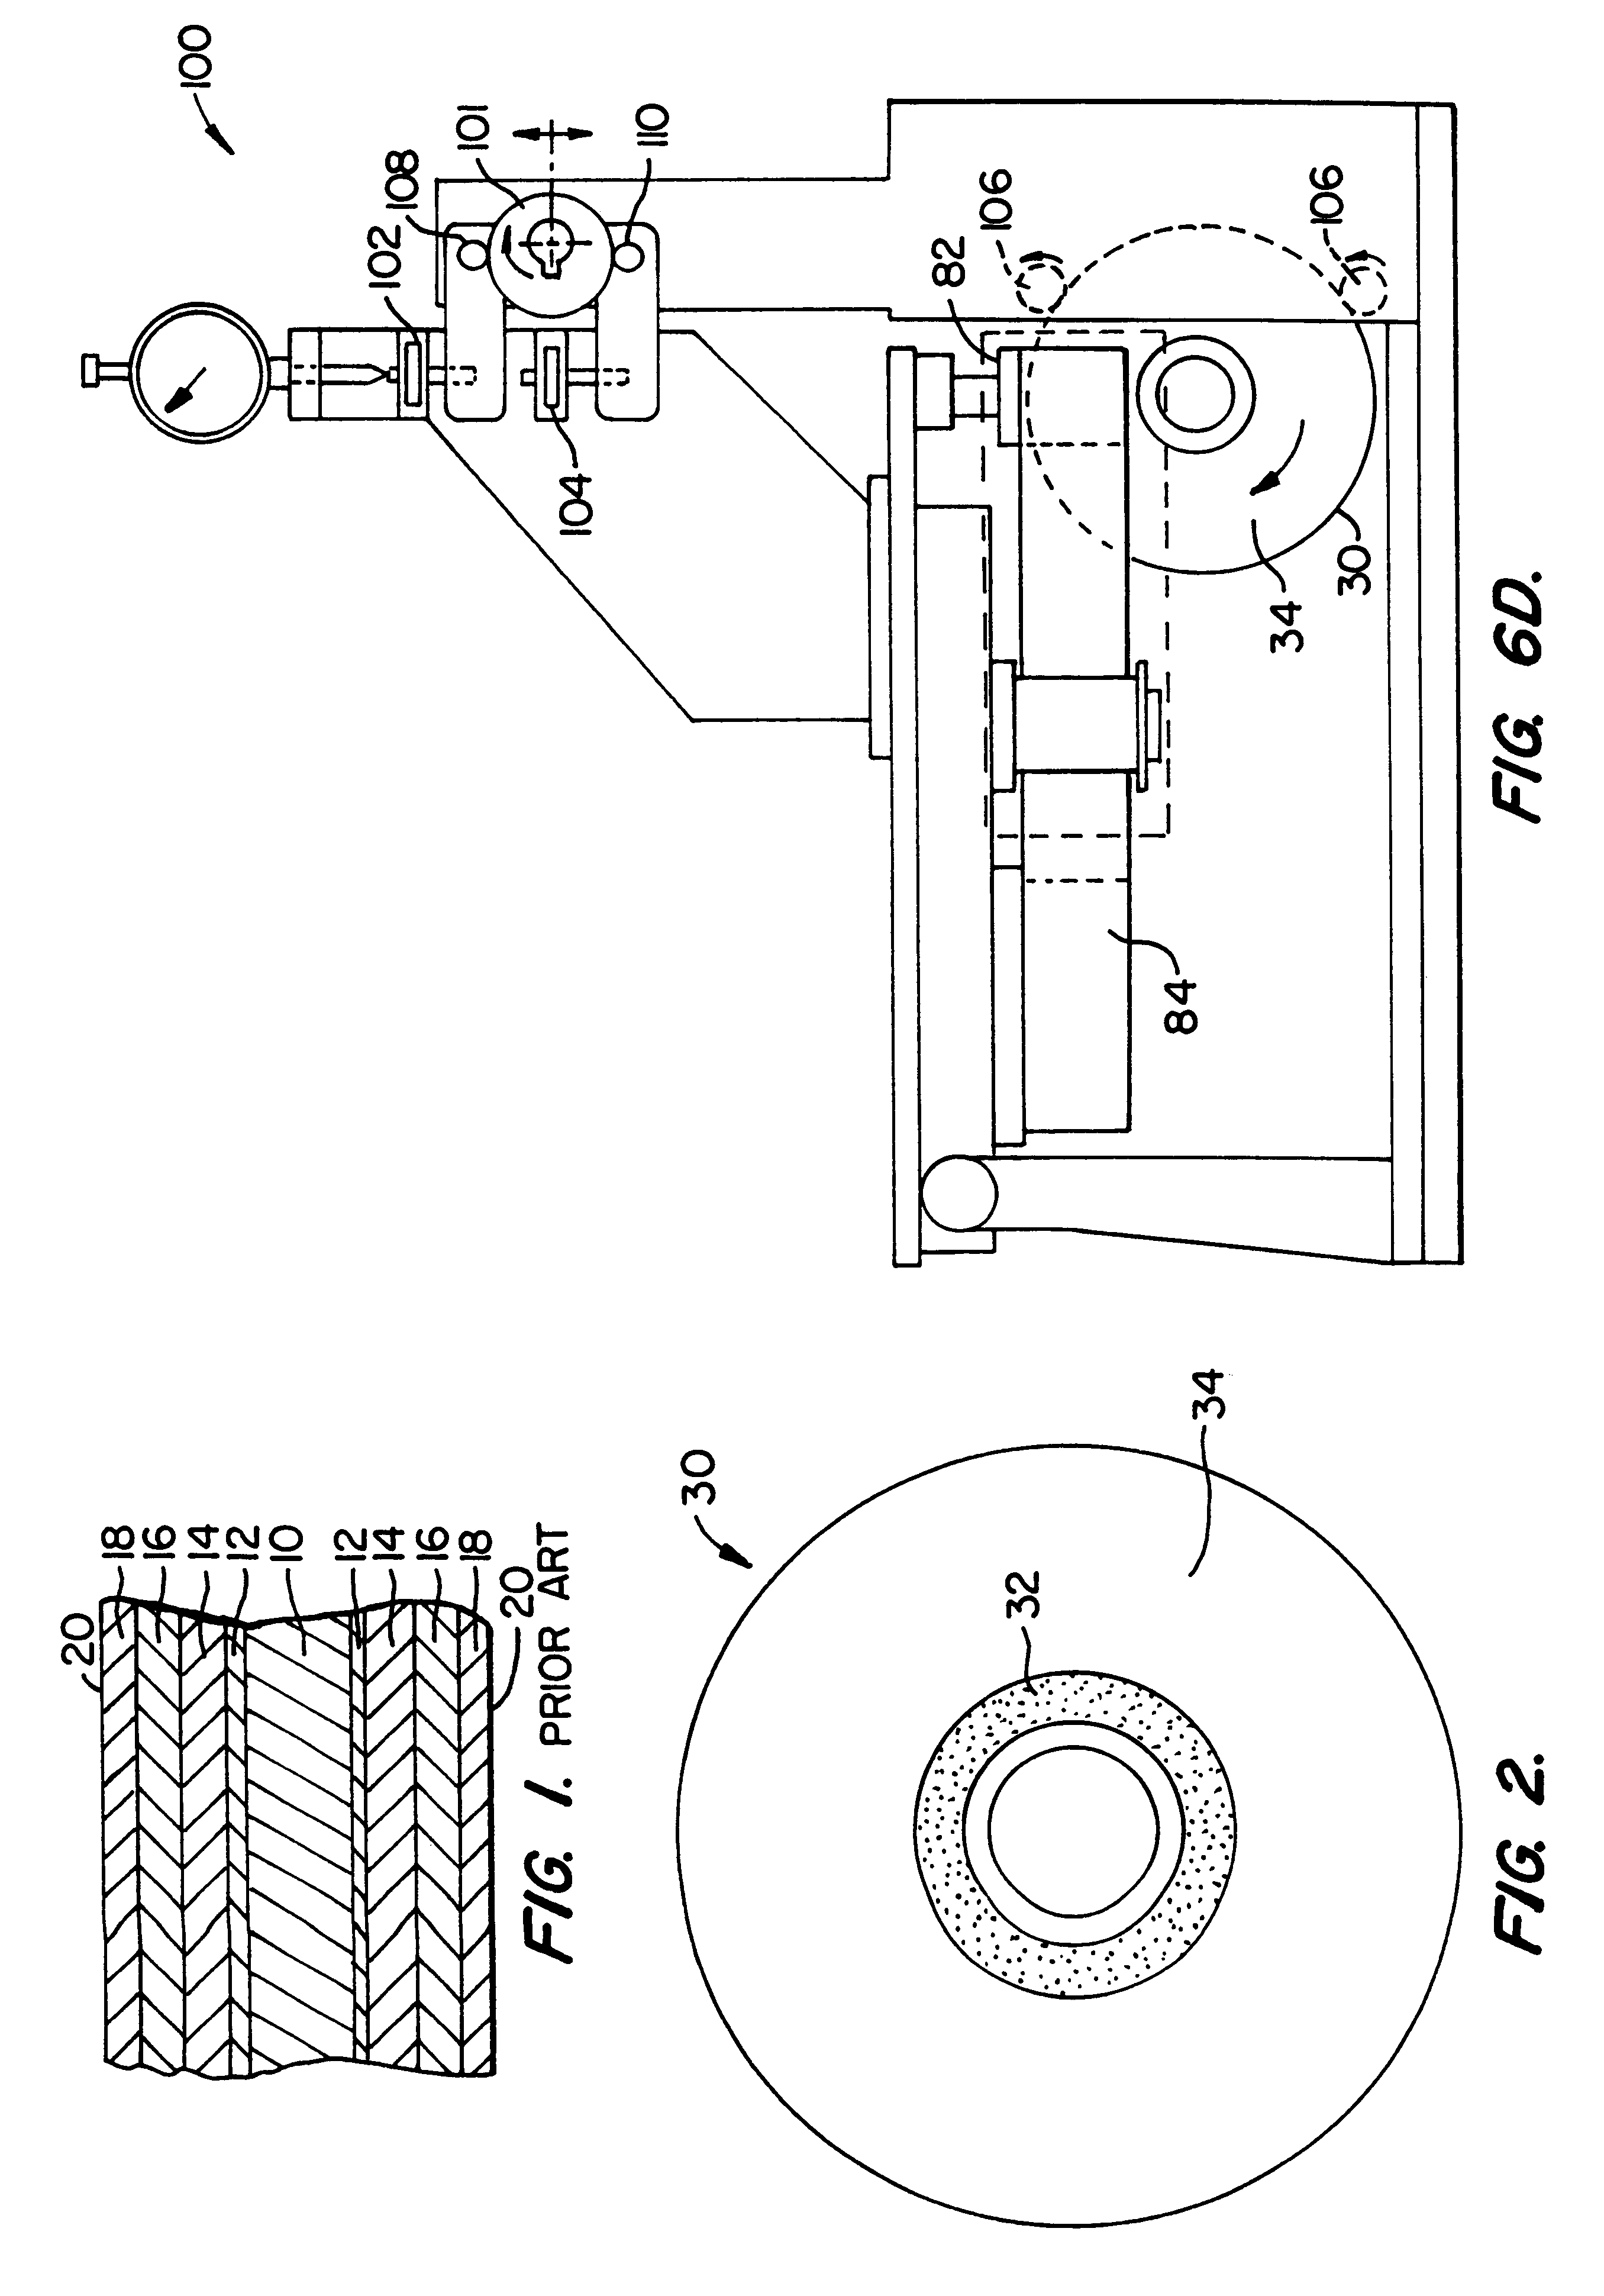 Abrasive tape for texturing magnetic recording media